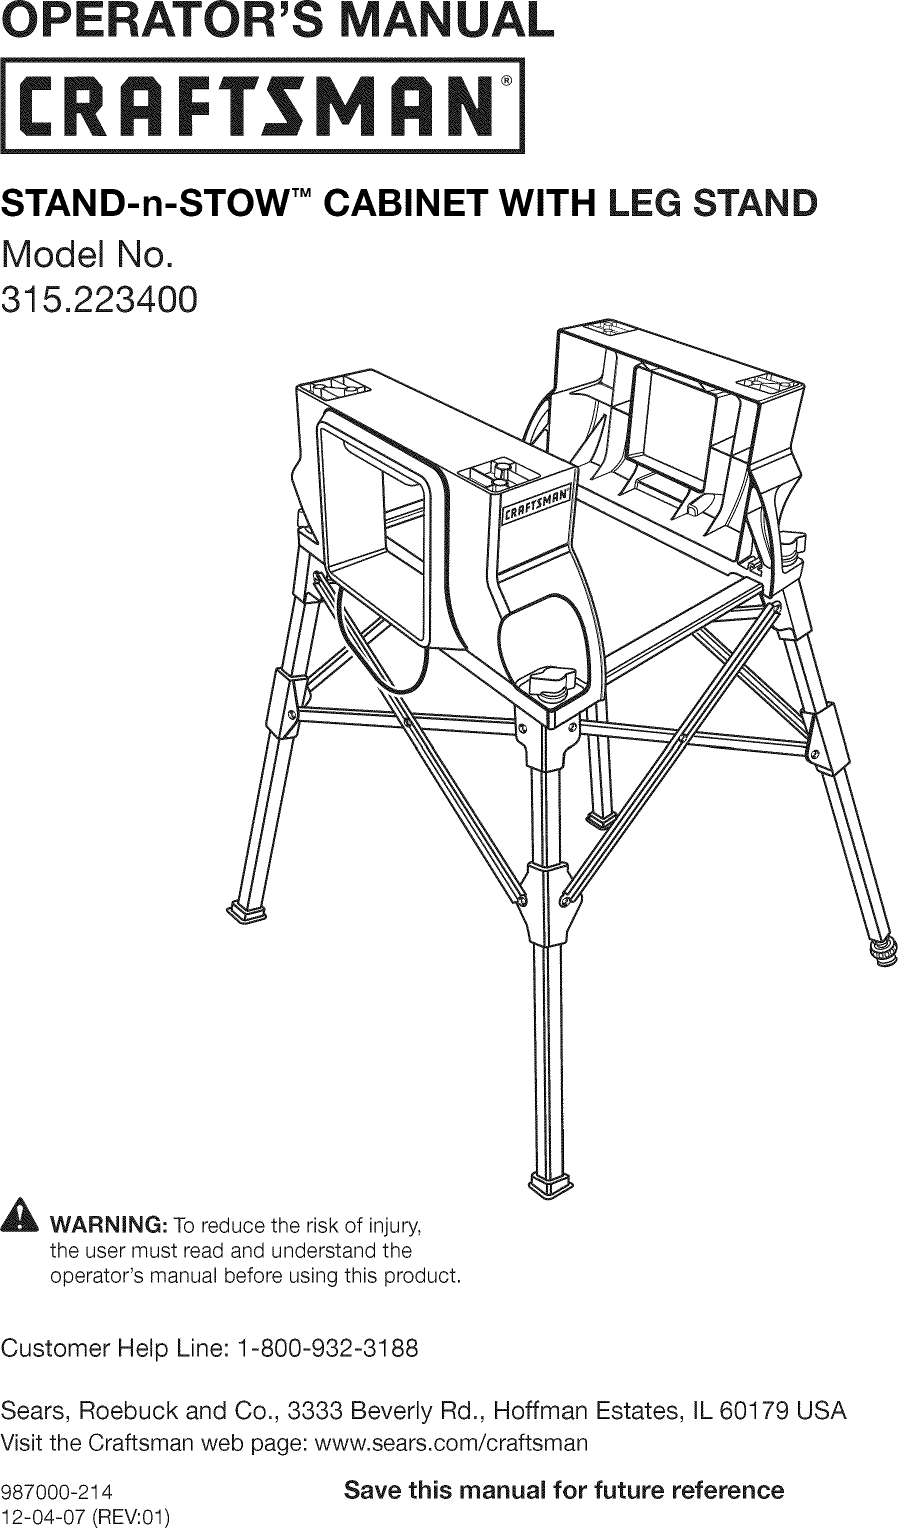 Page 1 of 6 - Craftsman 315223400 User Manual  STAND-N-STOW CABINET - Manuals And Guides L0905113